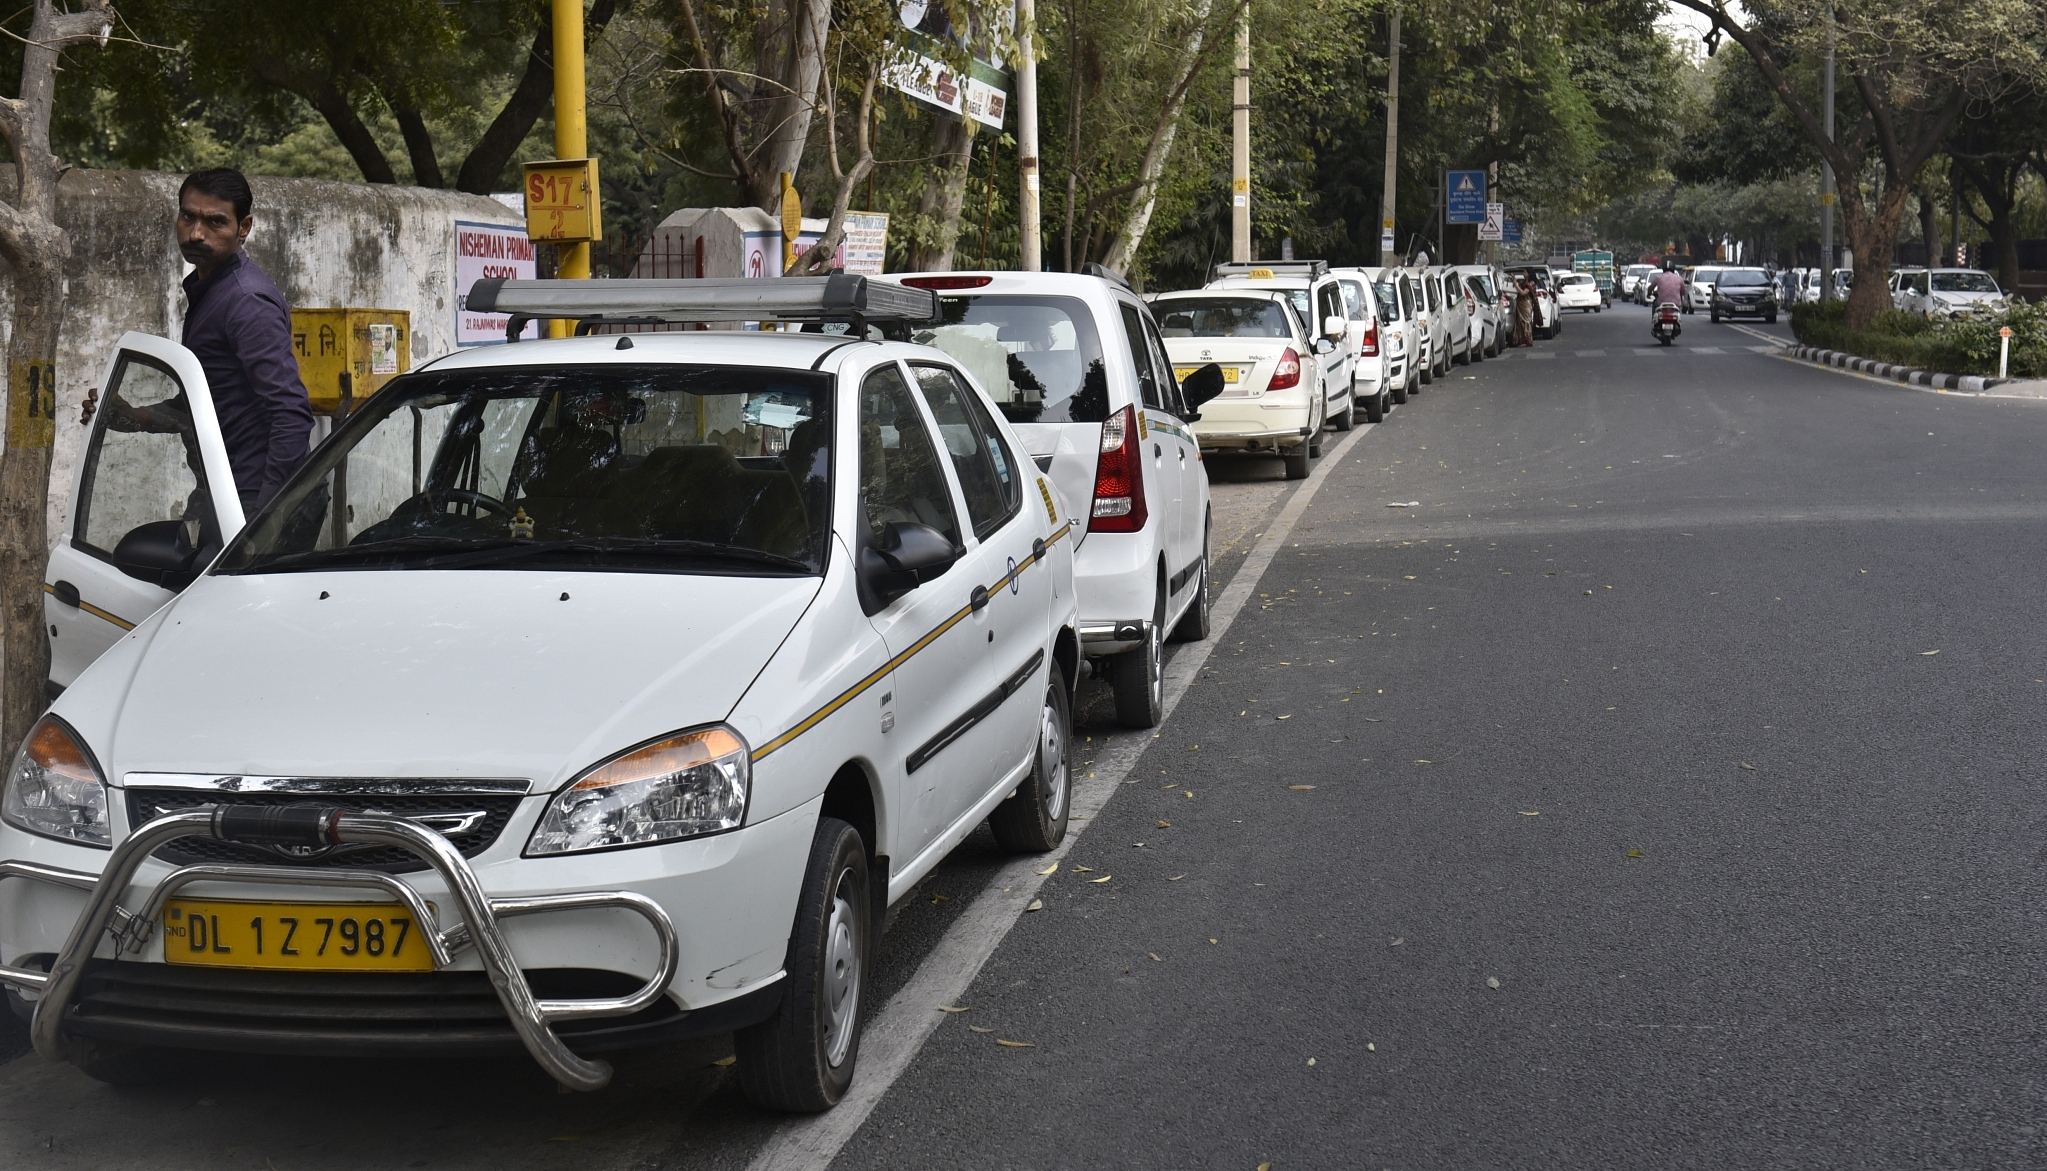 Ride-sharing cabs in Delhi (Sushil Kumar/Hindustan Times via Getty Images)